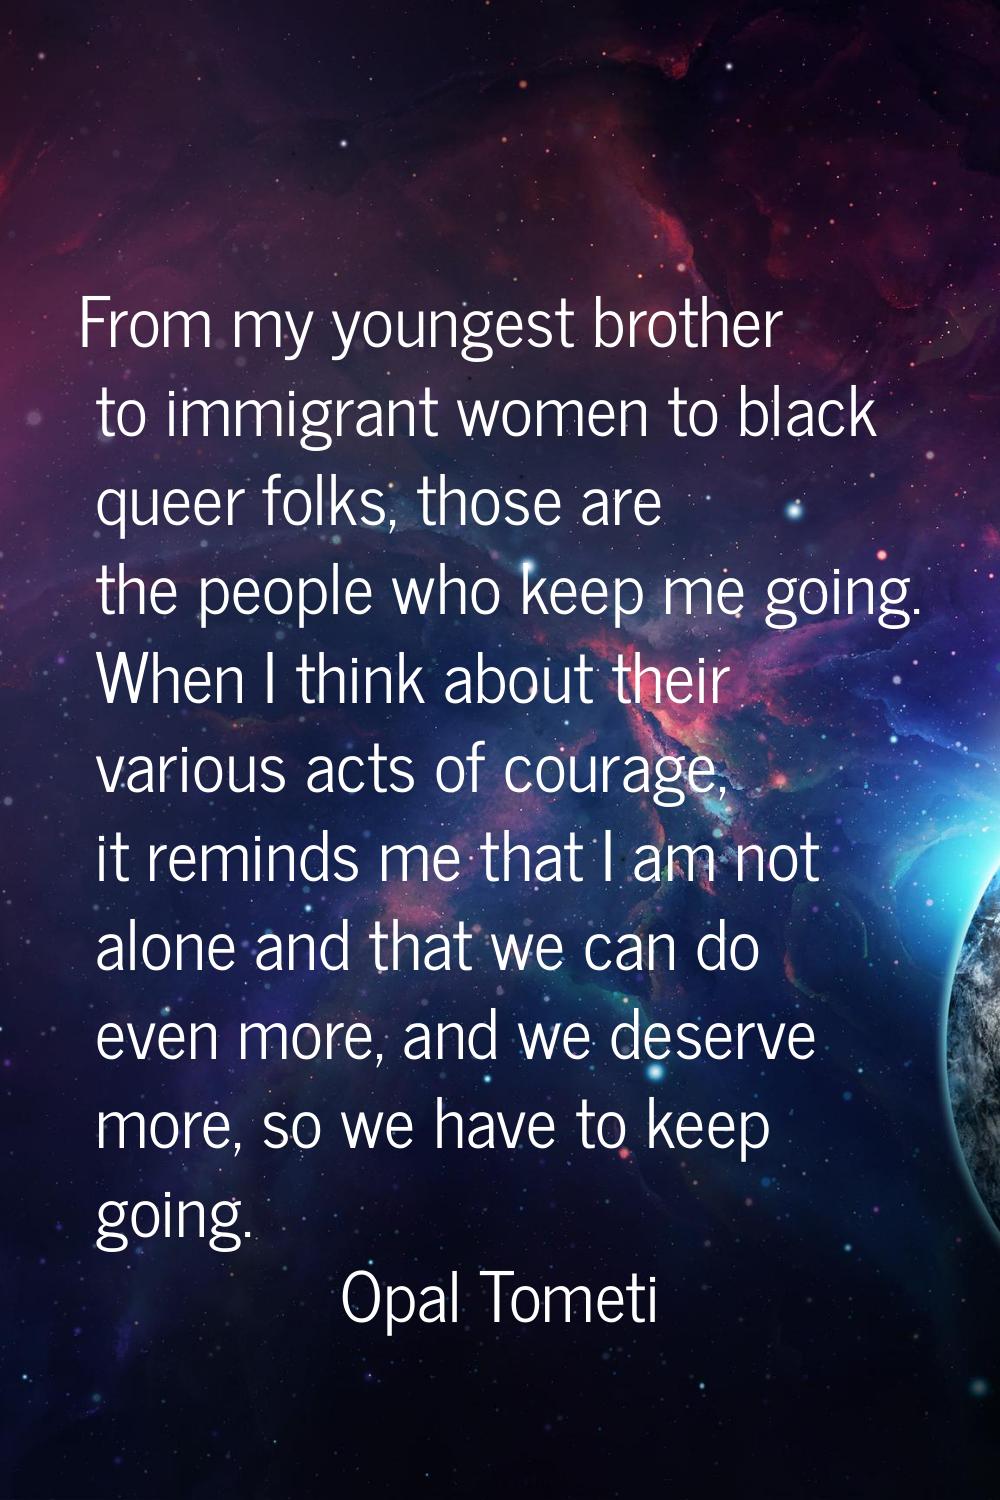 From my youngest brother to immigrant women to black queer folks, those are the people who keep me 